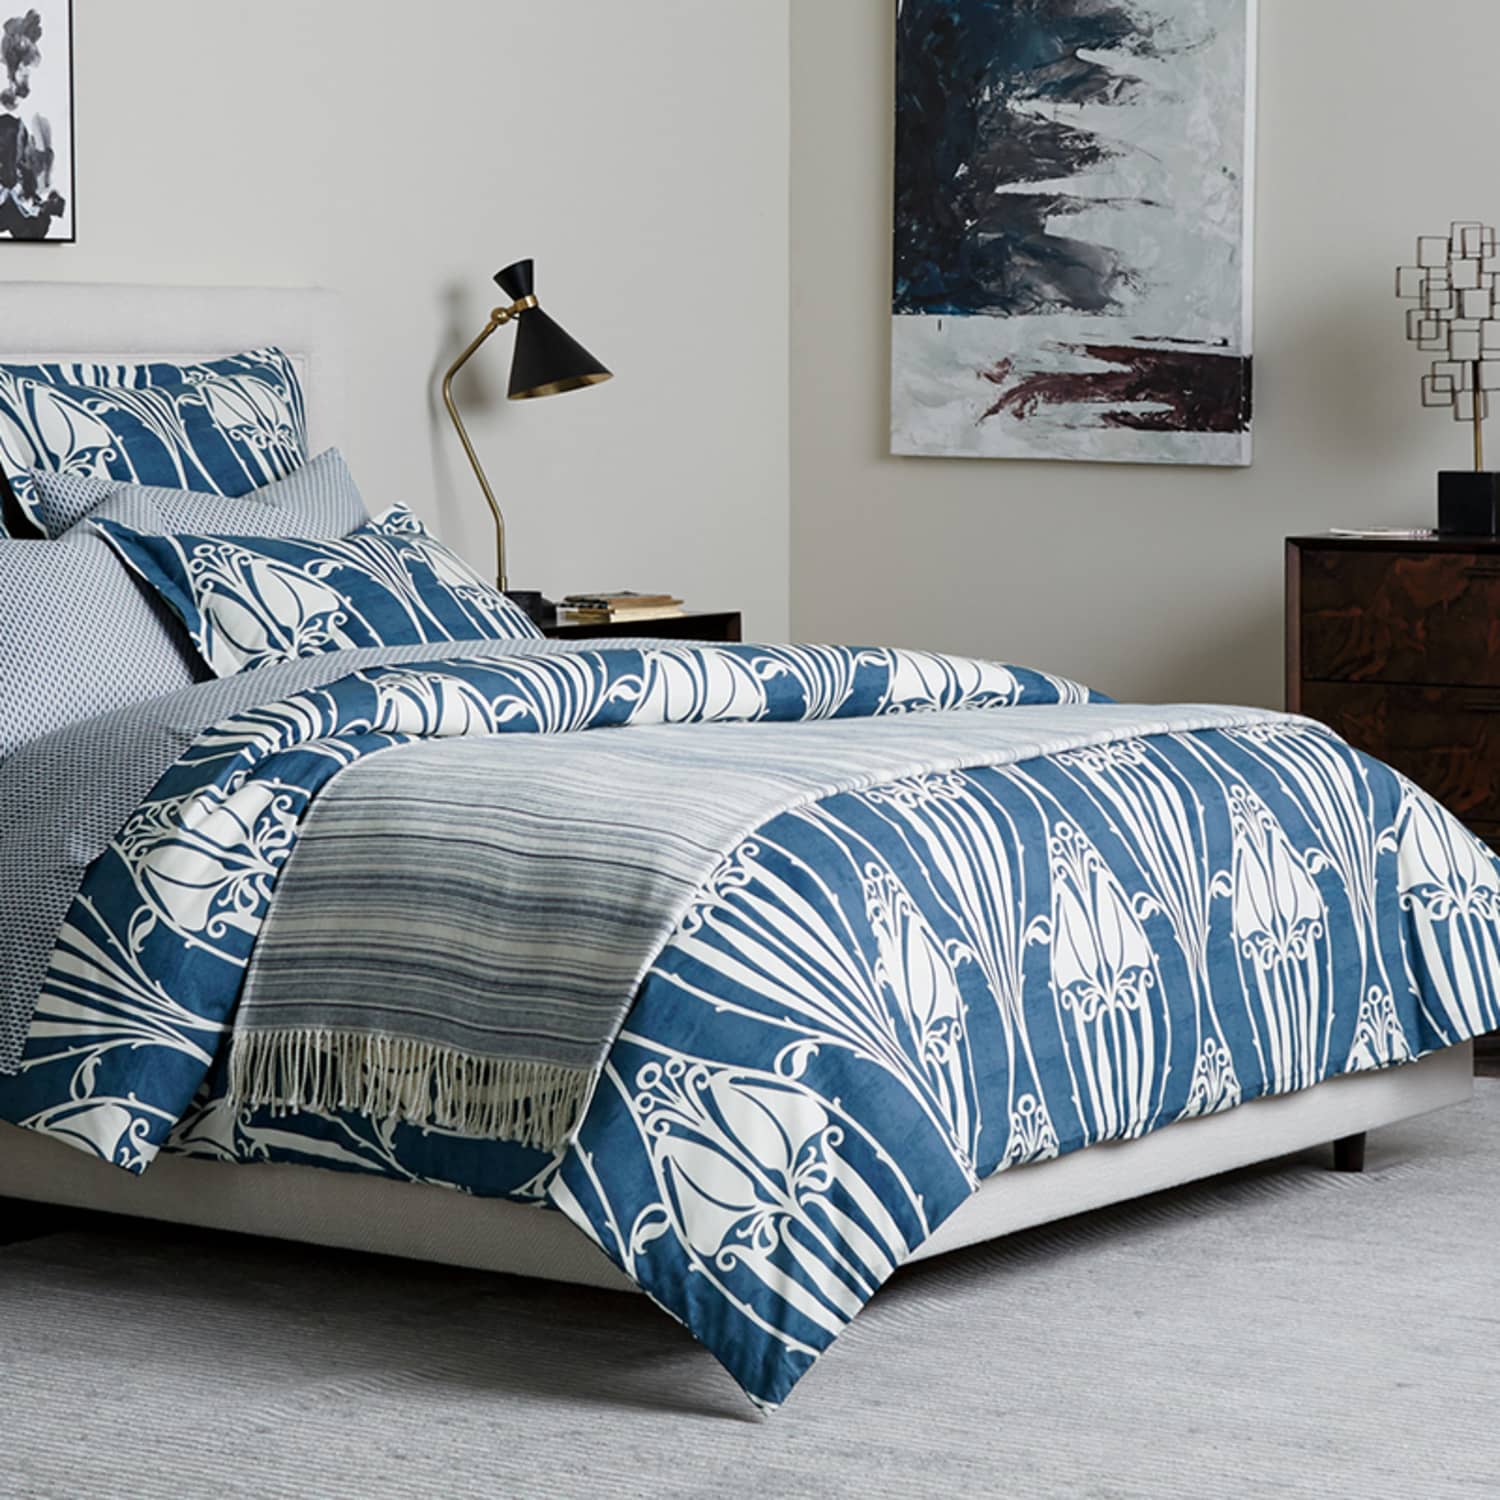 Best Places To Shop For Comforter Sets And Duvet Covers